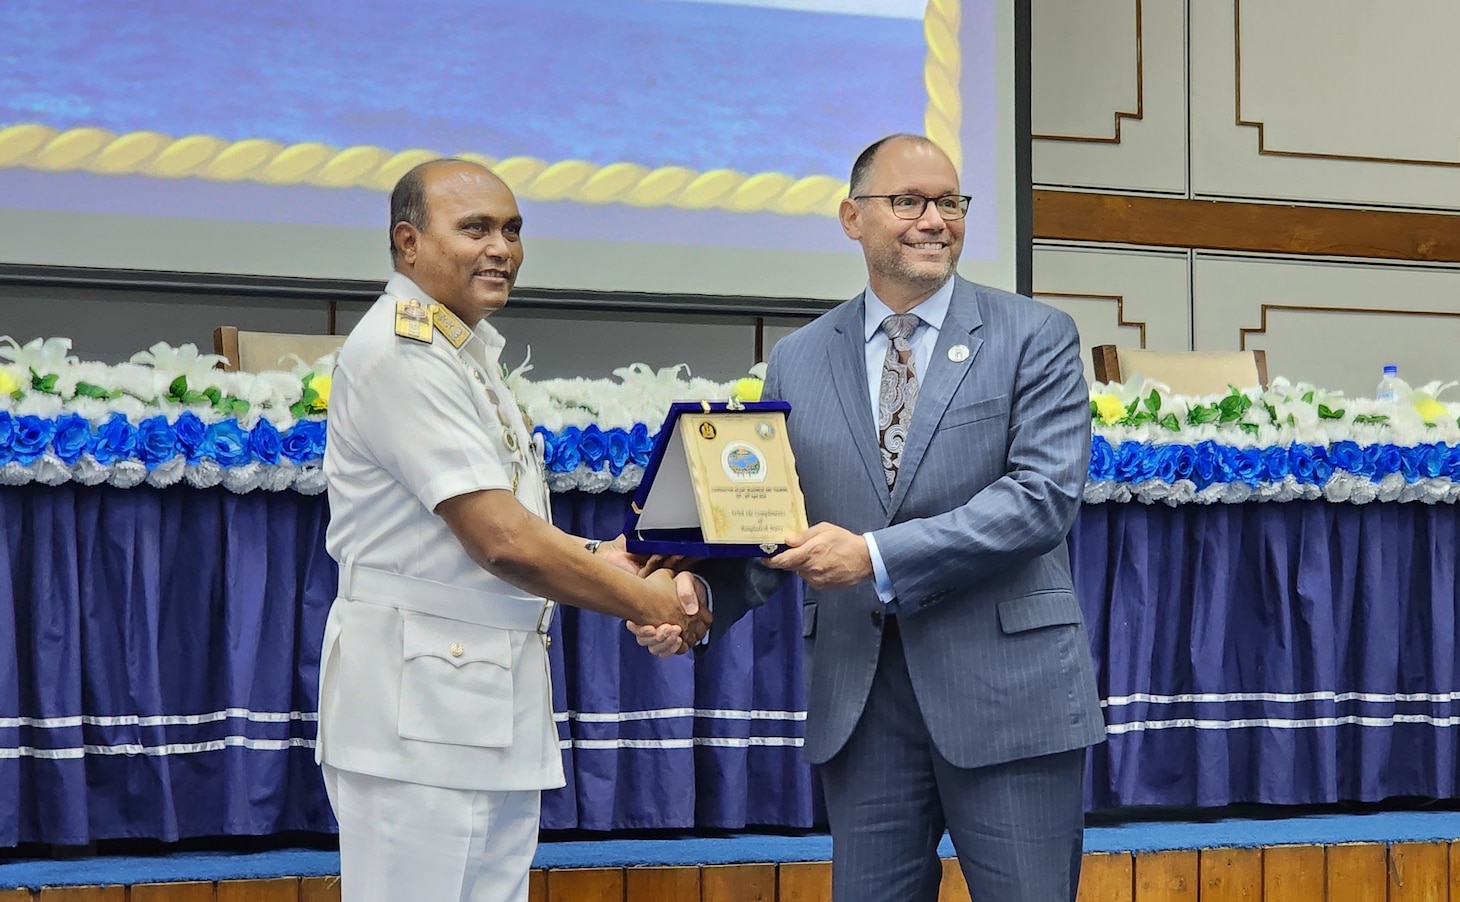 240422-N-NR876-1939 CHATTOGRAM, Bangladesh (April 22, 2024)- Bangladesh Navy head of delegation Rear Adm. Mohammad Anwar Hossain, left, presents a plaque to the U.S. Ambassador to Bangladesh, Mr. Peter Haas during the opening ceremony of Cooperation Afloat Readiness and Training (CARAT) Exercise Bangladesh 2024. CARAT Bangladesh is a week-long exercise that seeks to enhance collaboration focused on shared maritime security challenges in the region. As the 30th iteration of the Cooperation Afloat Readiness and Training (CARAT) series, 2024 highlights the longstanding role of CARAT as a credible venue for regional Allies and partners to address shared maritime security priorities.